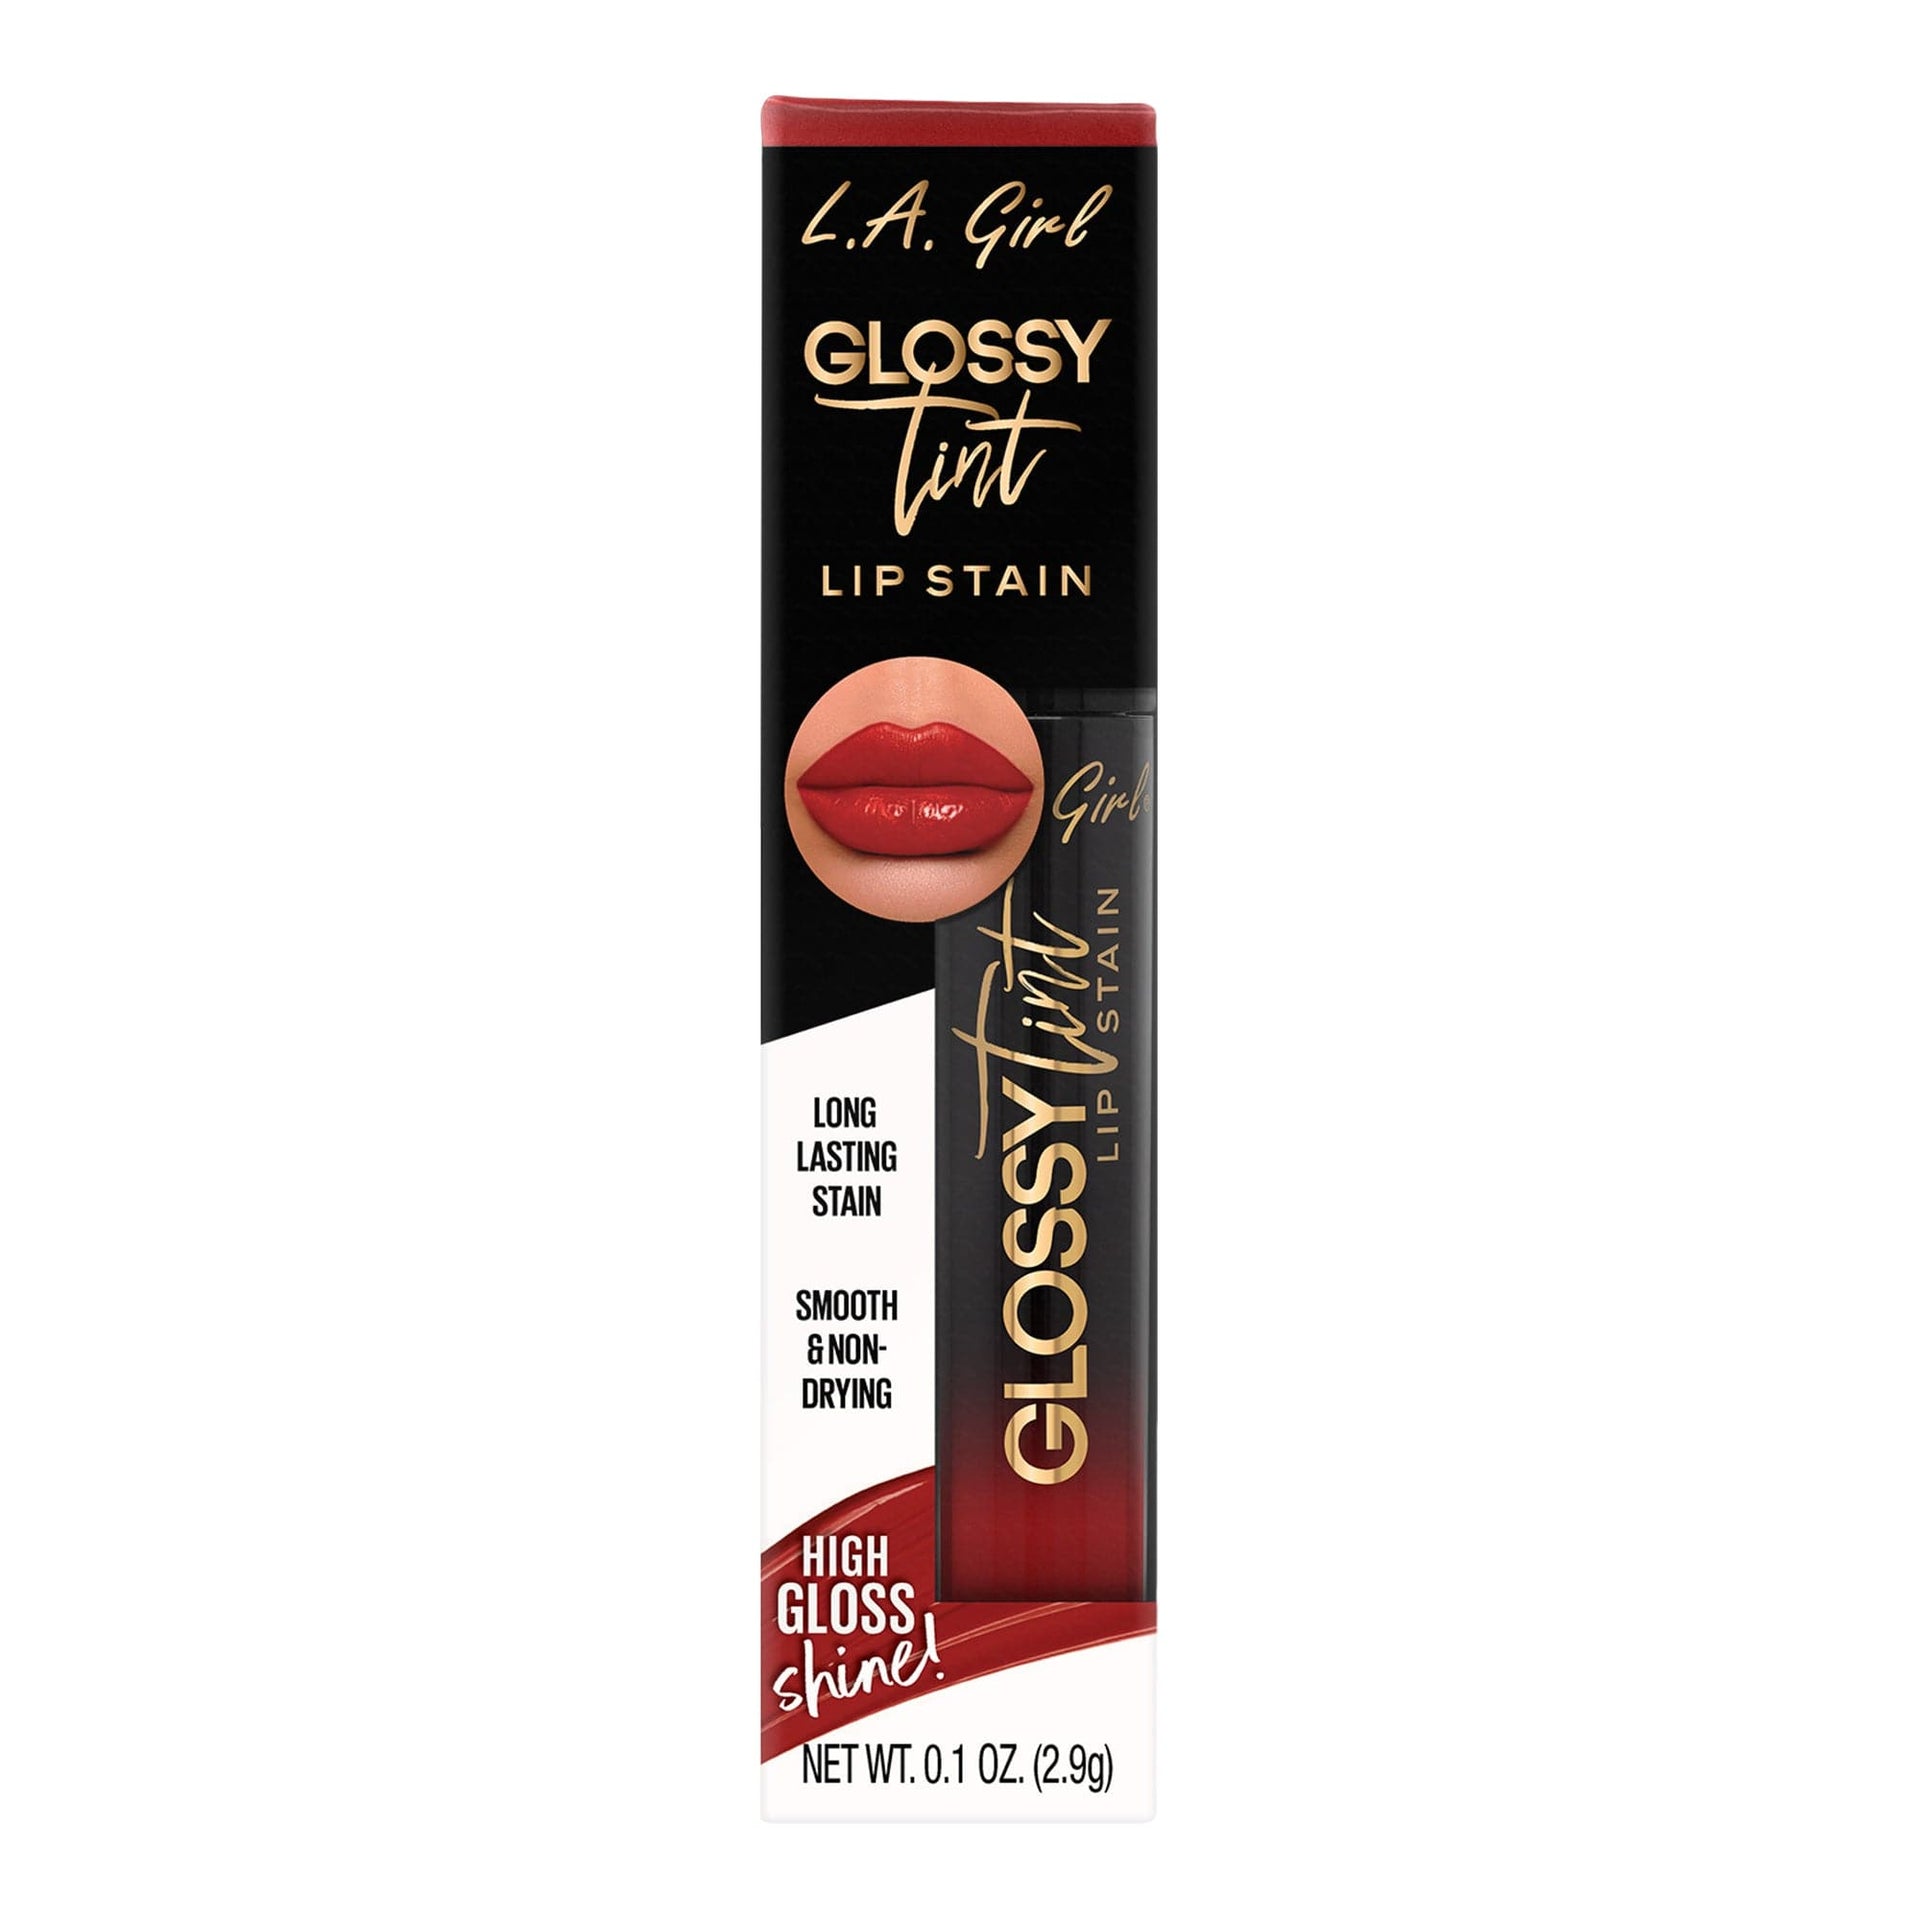 Glossy Tint Lip Stain 